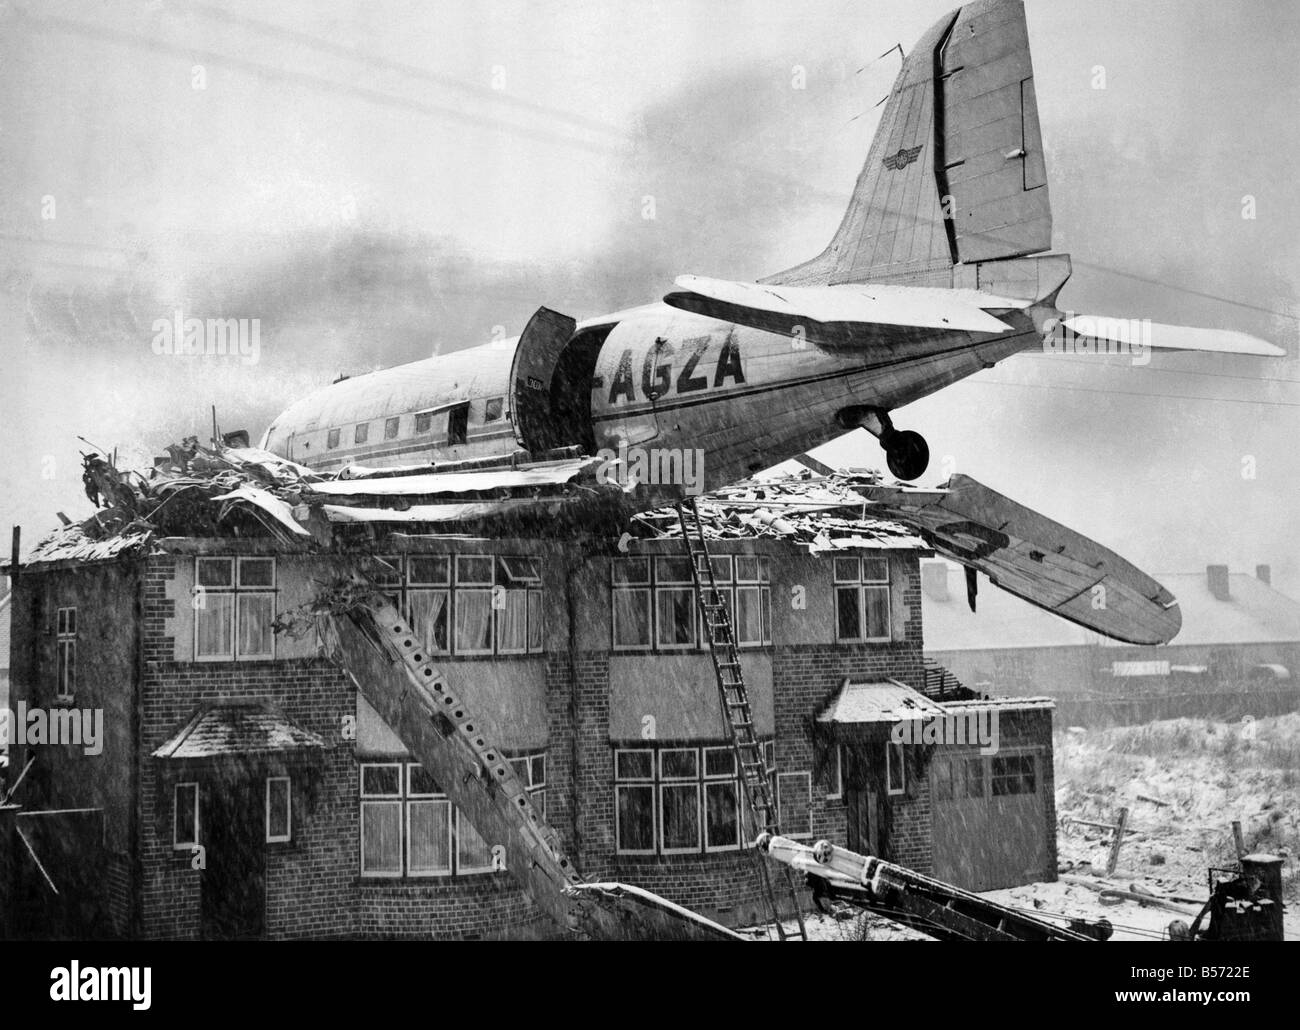 A Dakota air liner of Railway Air Services crashed into two houses in South Ruislip. No one was injured. December 1946 Stock Photo